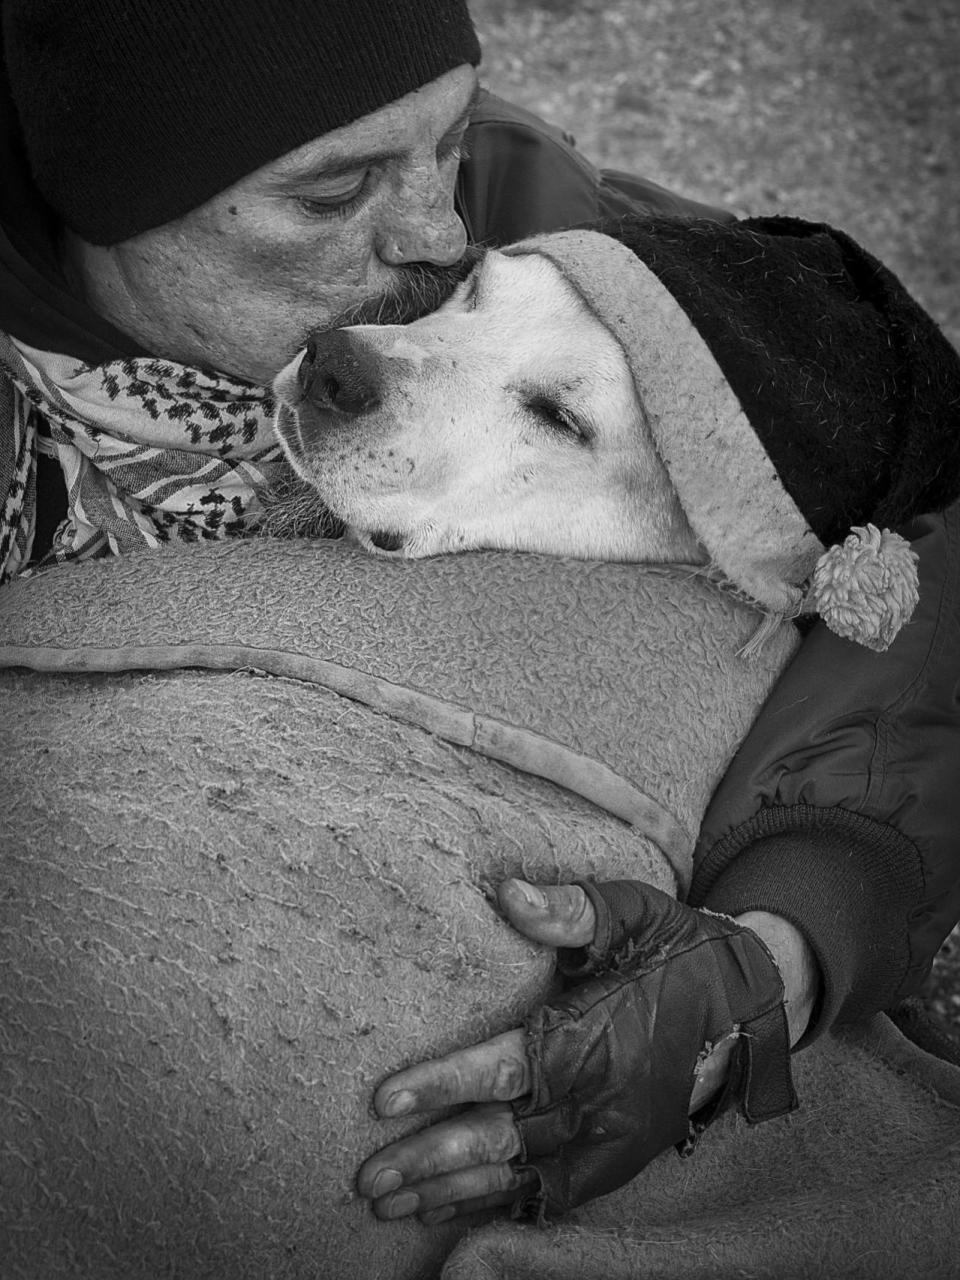 <p>A man gives a kiss to his hat-wearing dog as they cuddle together under a blanket. (Polina Ulyanova/PA Wire)</p>